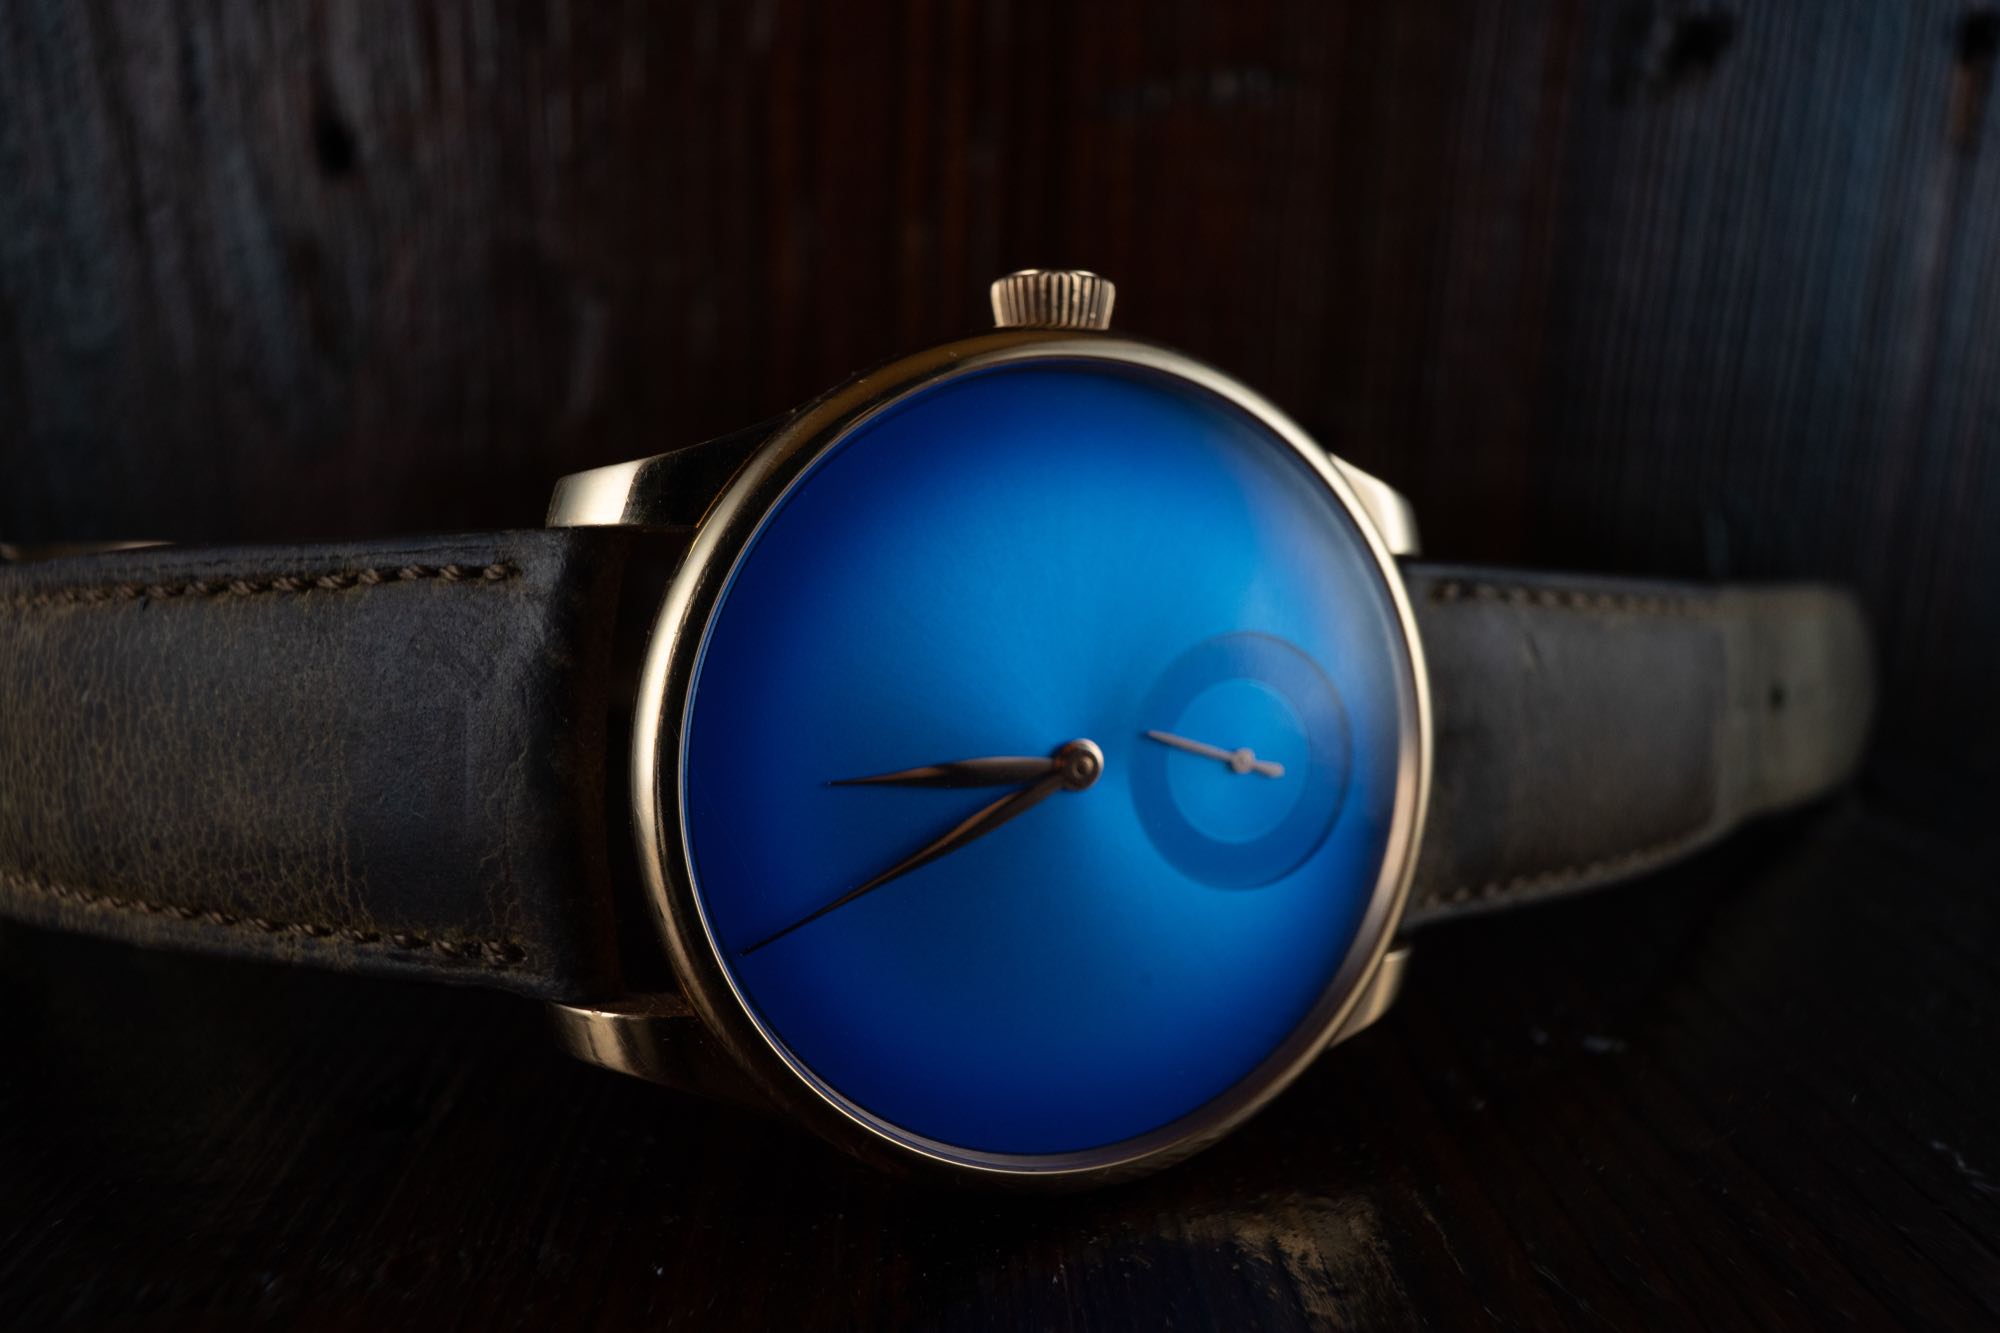 Hands-On Moser & Cie. Venturer Small Seconds Concept in Arctic Blue